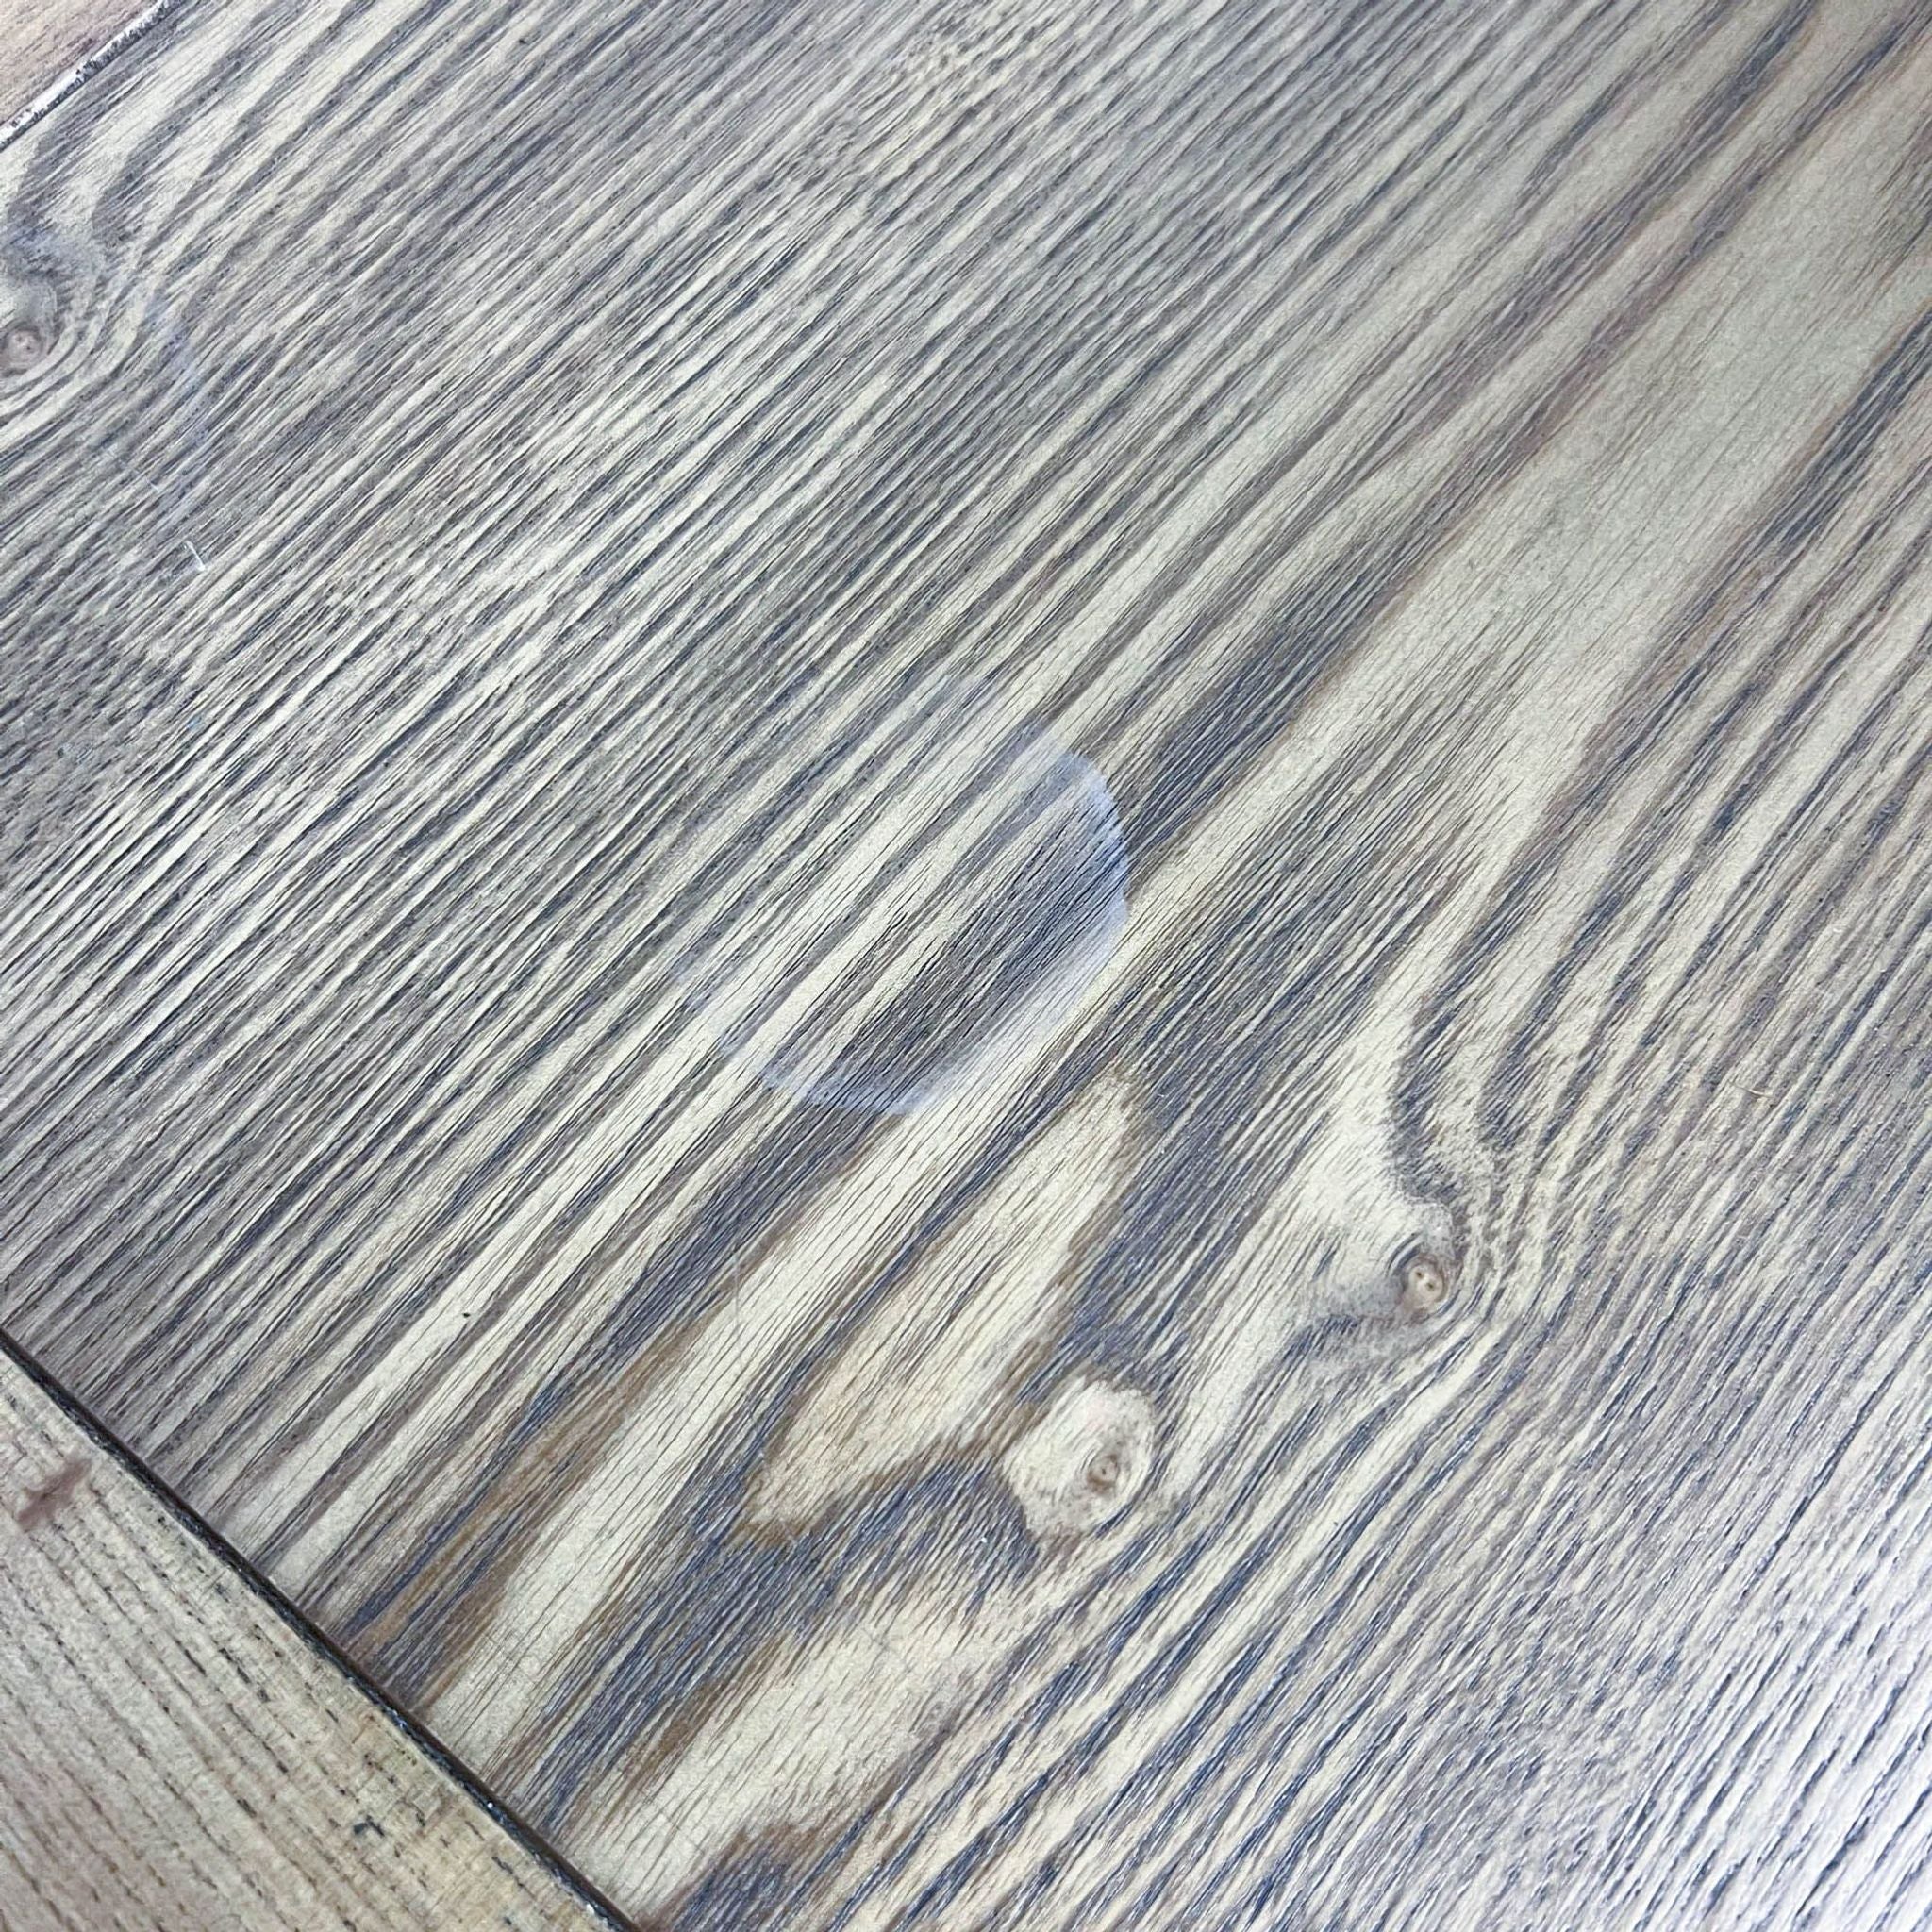 Close-up texture of a Reperch coffee table with a whitewashed wood grain finish.